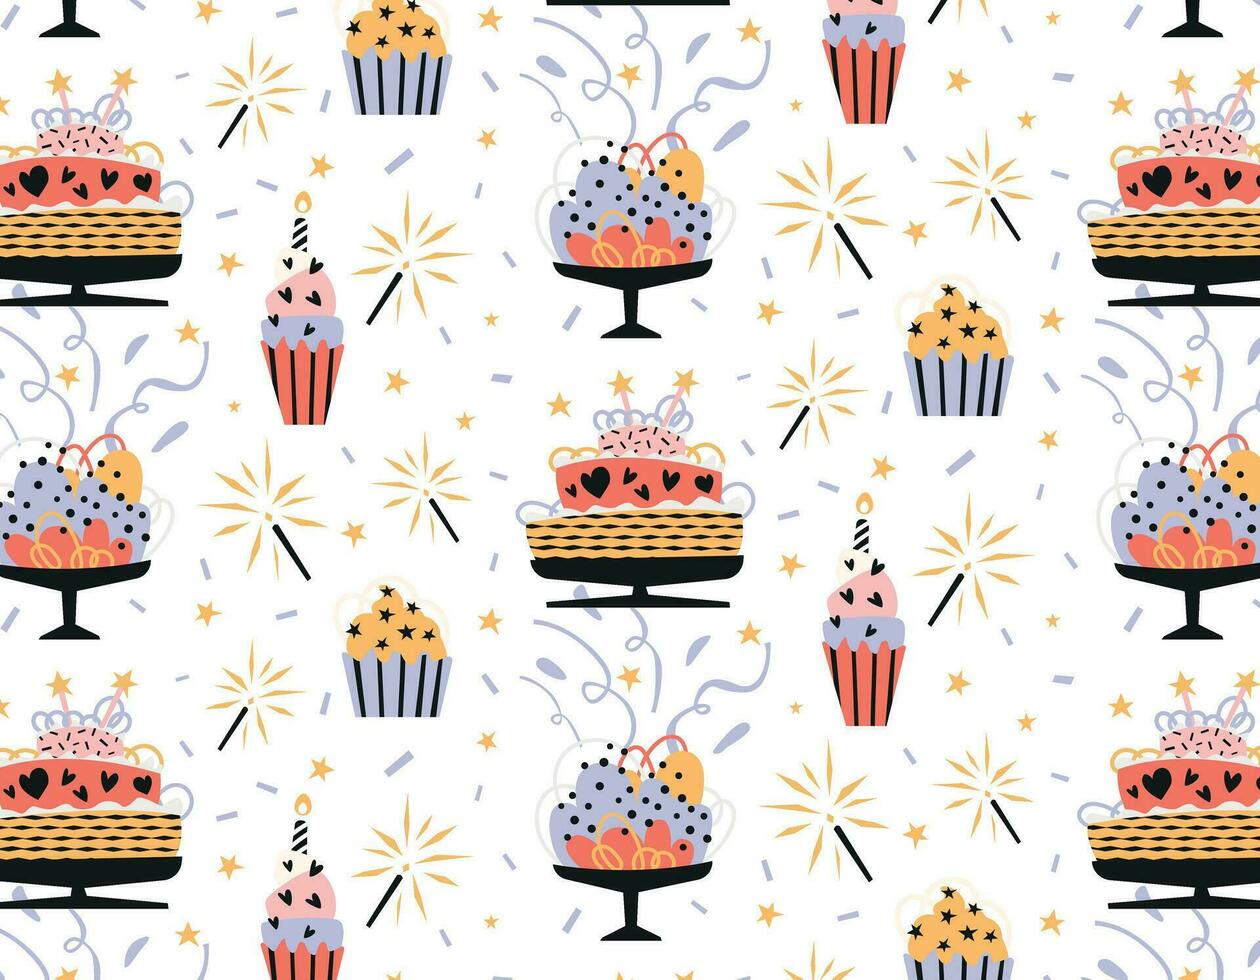 Cake and cupcake pattern, seamless pattern, flat design on transparent background, vector. Fireworks and stars vector